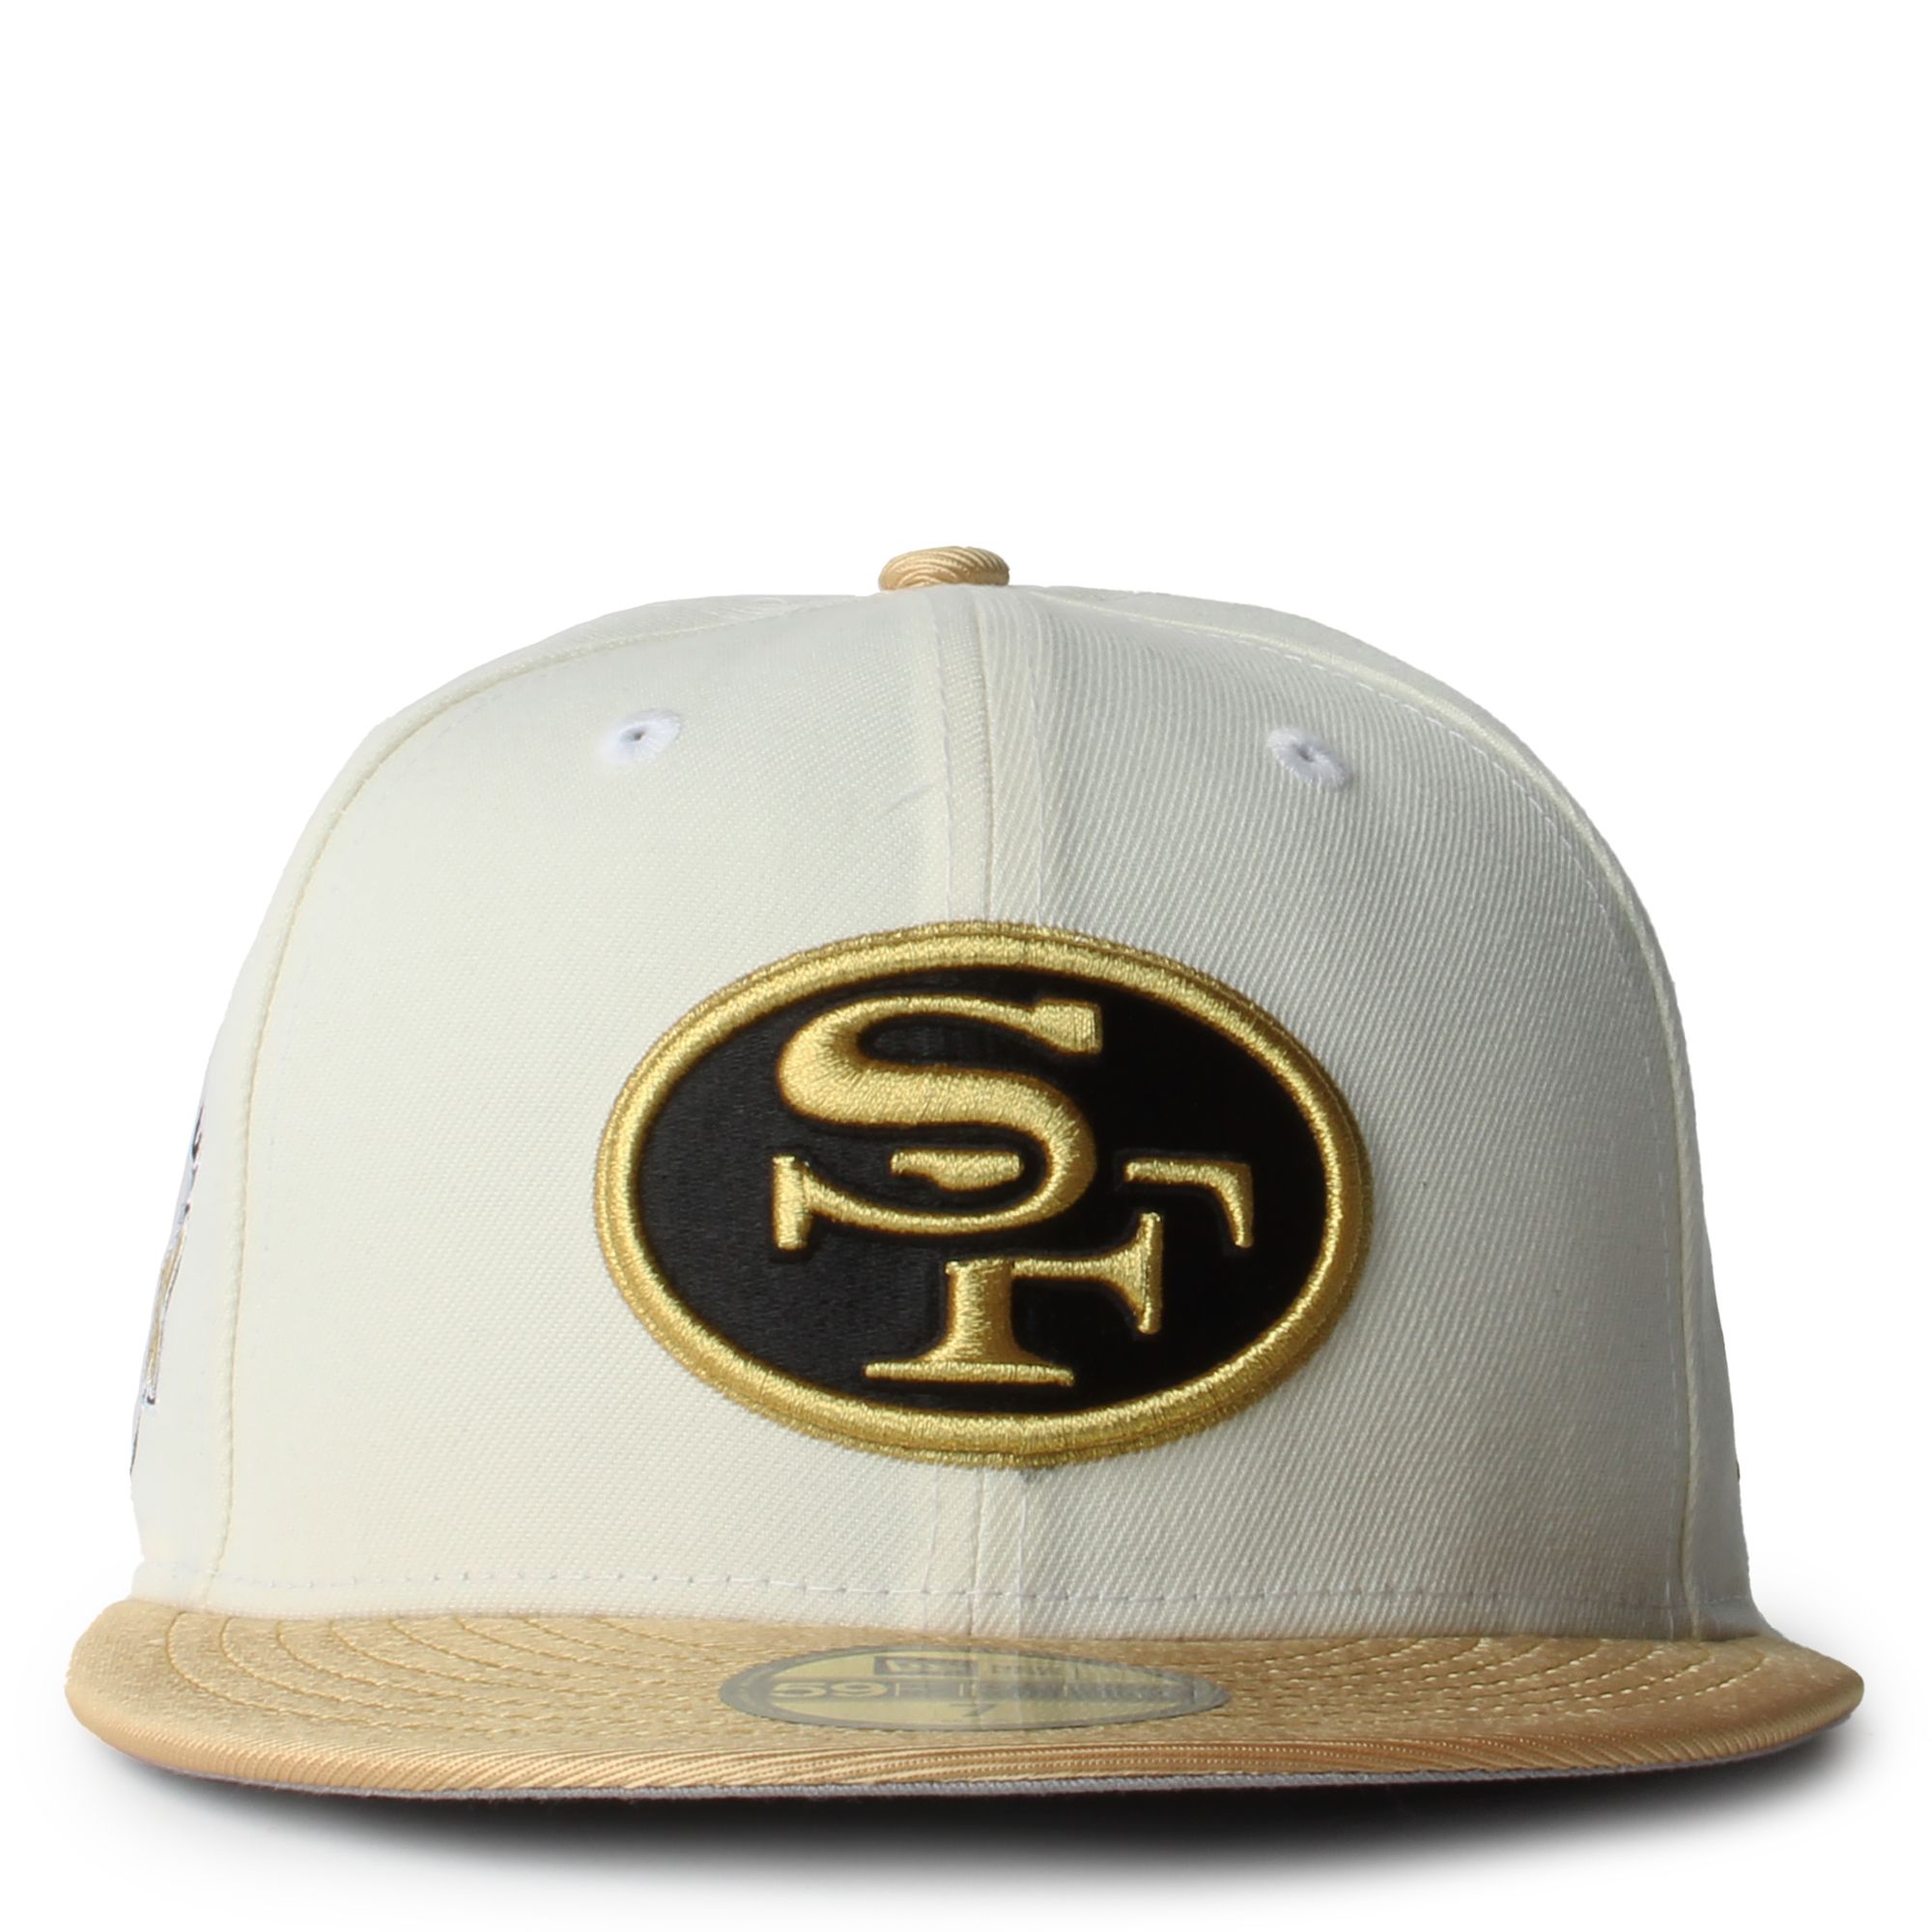 New Era Caps San Francisco 49ers Chrome Gold 59FIFTY Fitted Hat Black/Beige/Gold